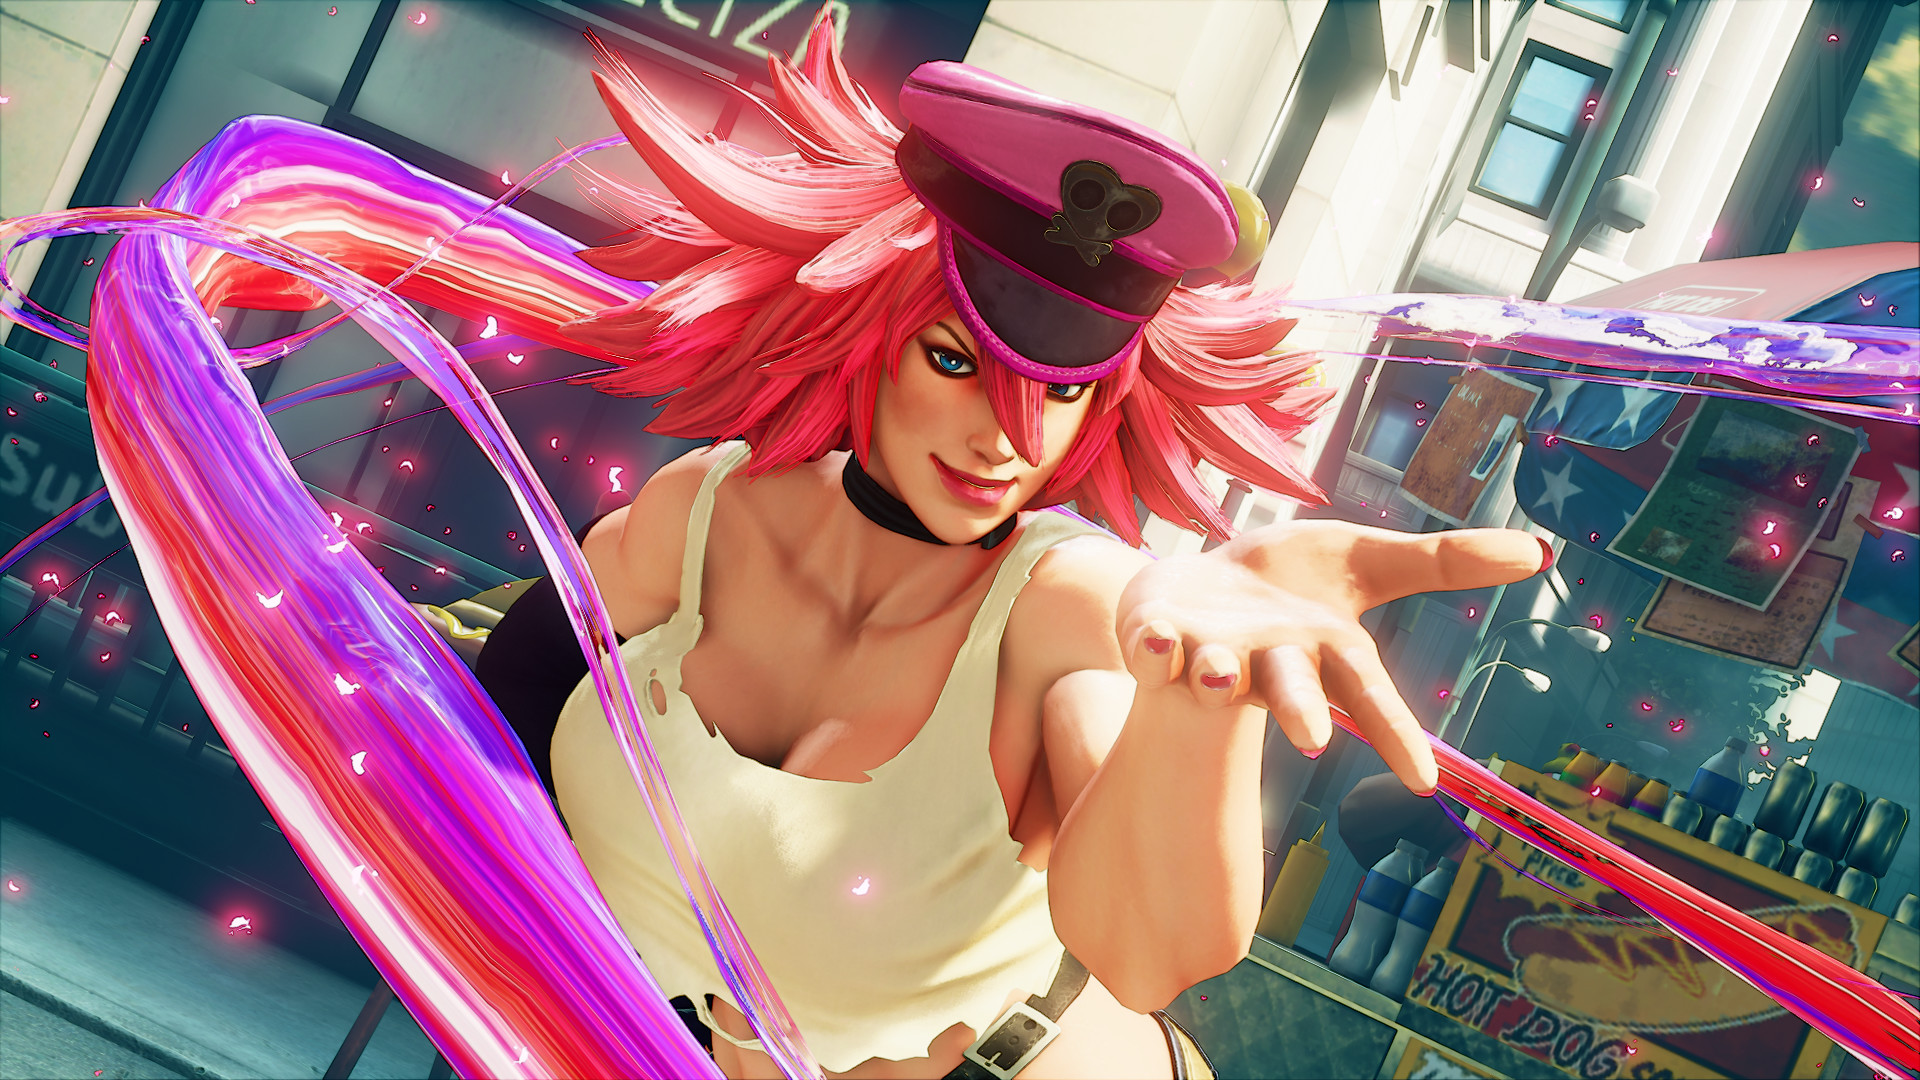 Street Fighter V getting a new physical release, Champion Edition All  Characters Pack (announced for Japan only for now)